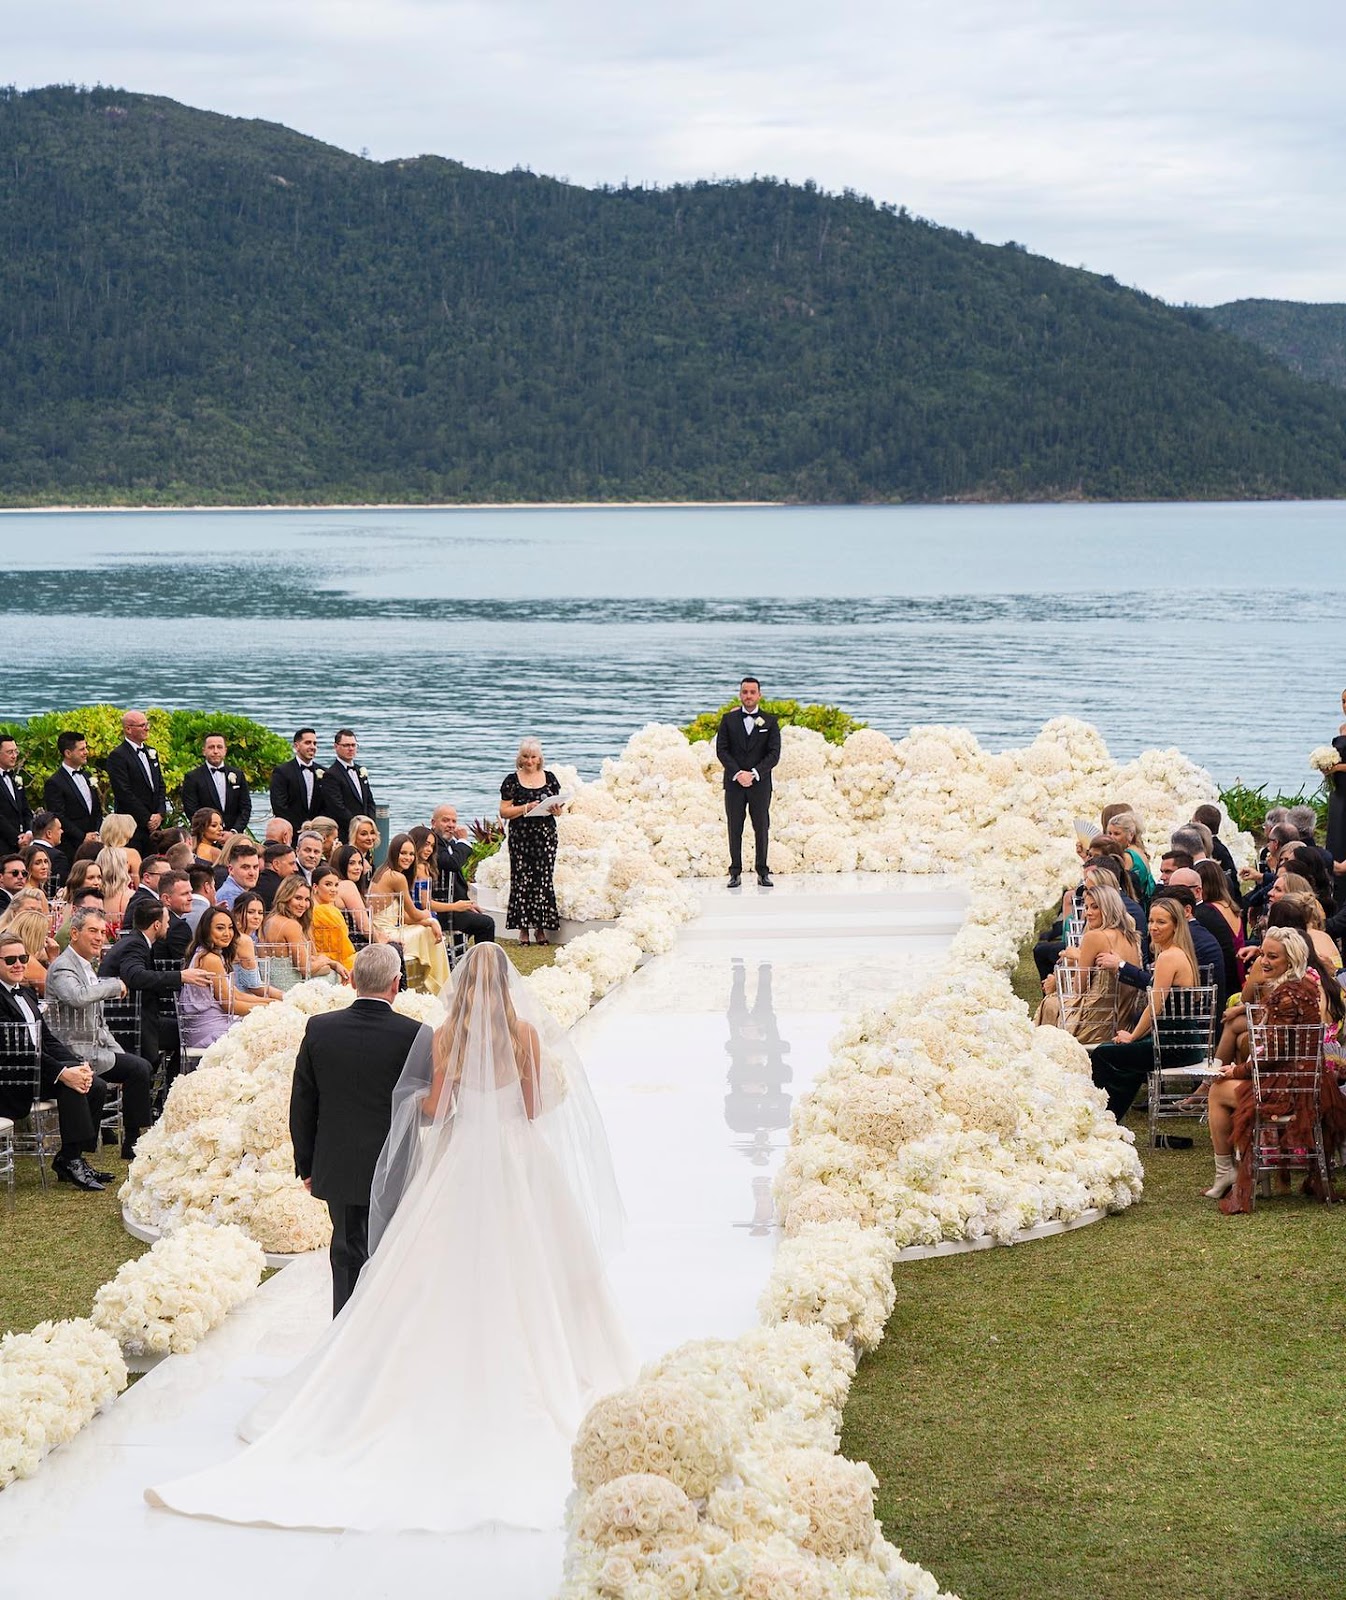 Behind the Scenes: Crafting a Luxury Wedding Experience with Diane Khoury